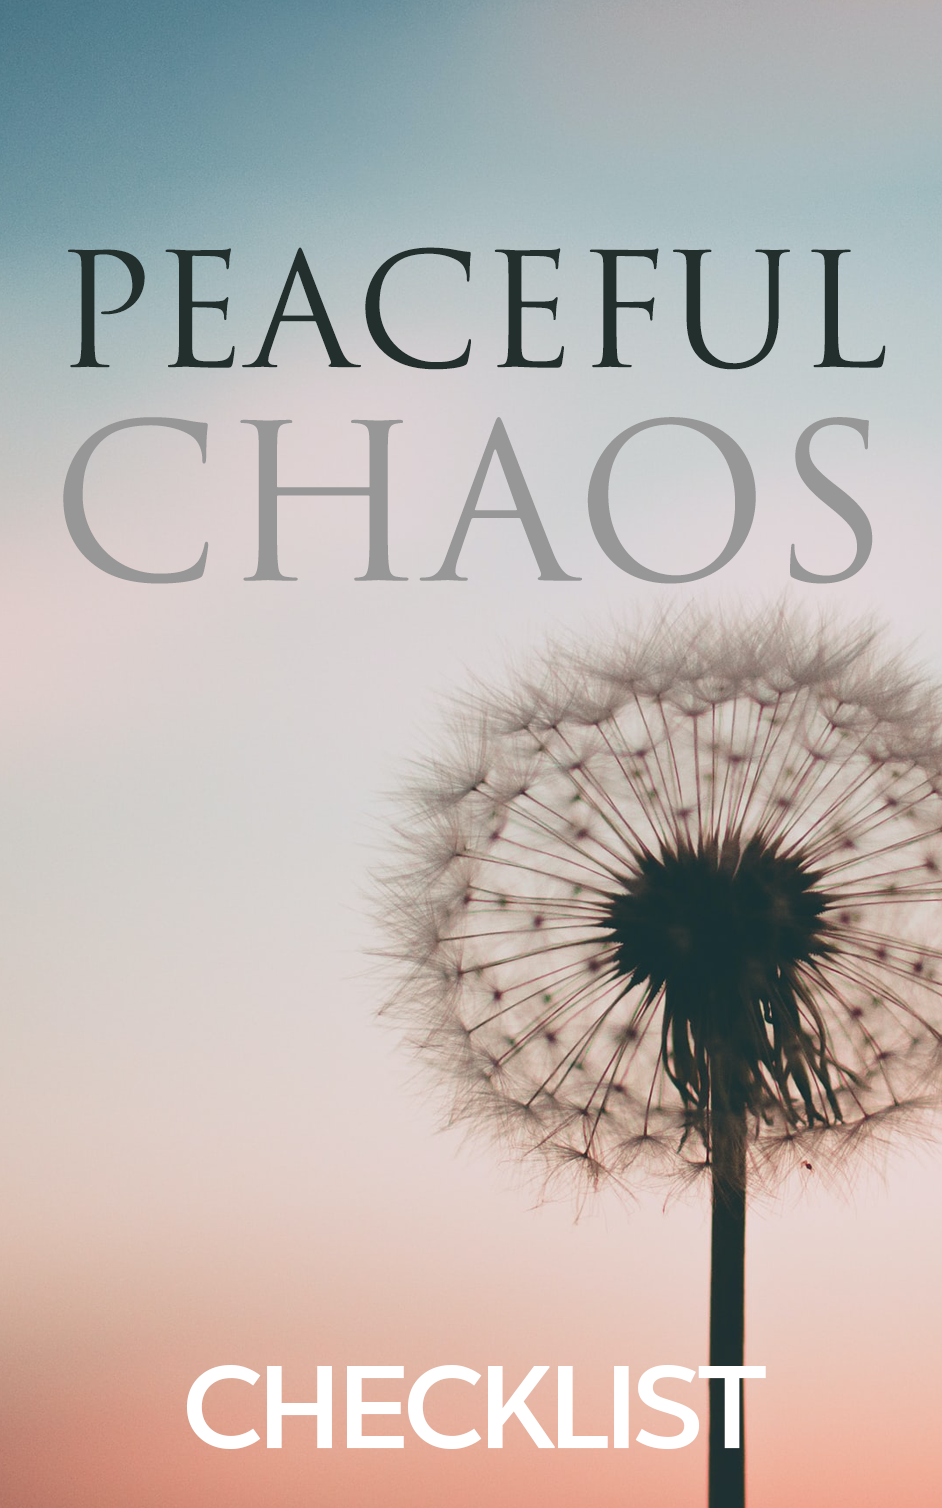 Peaceful Chaos PDF Ebook Learn to Master Emotions and Eliminate Anxiety - Download Delight